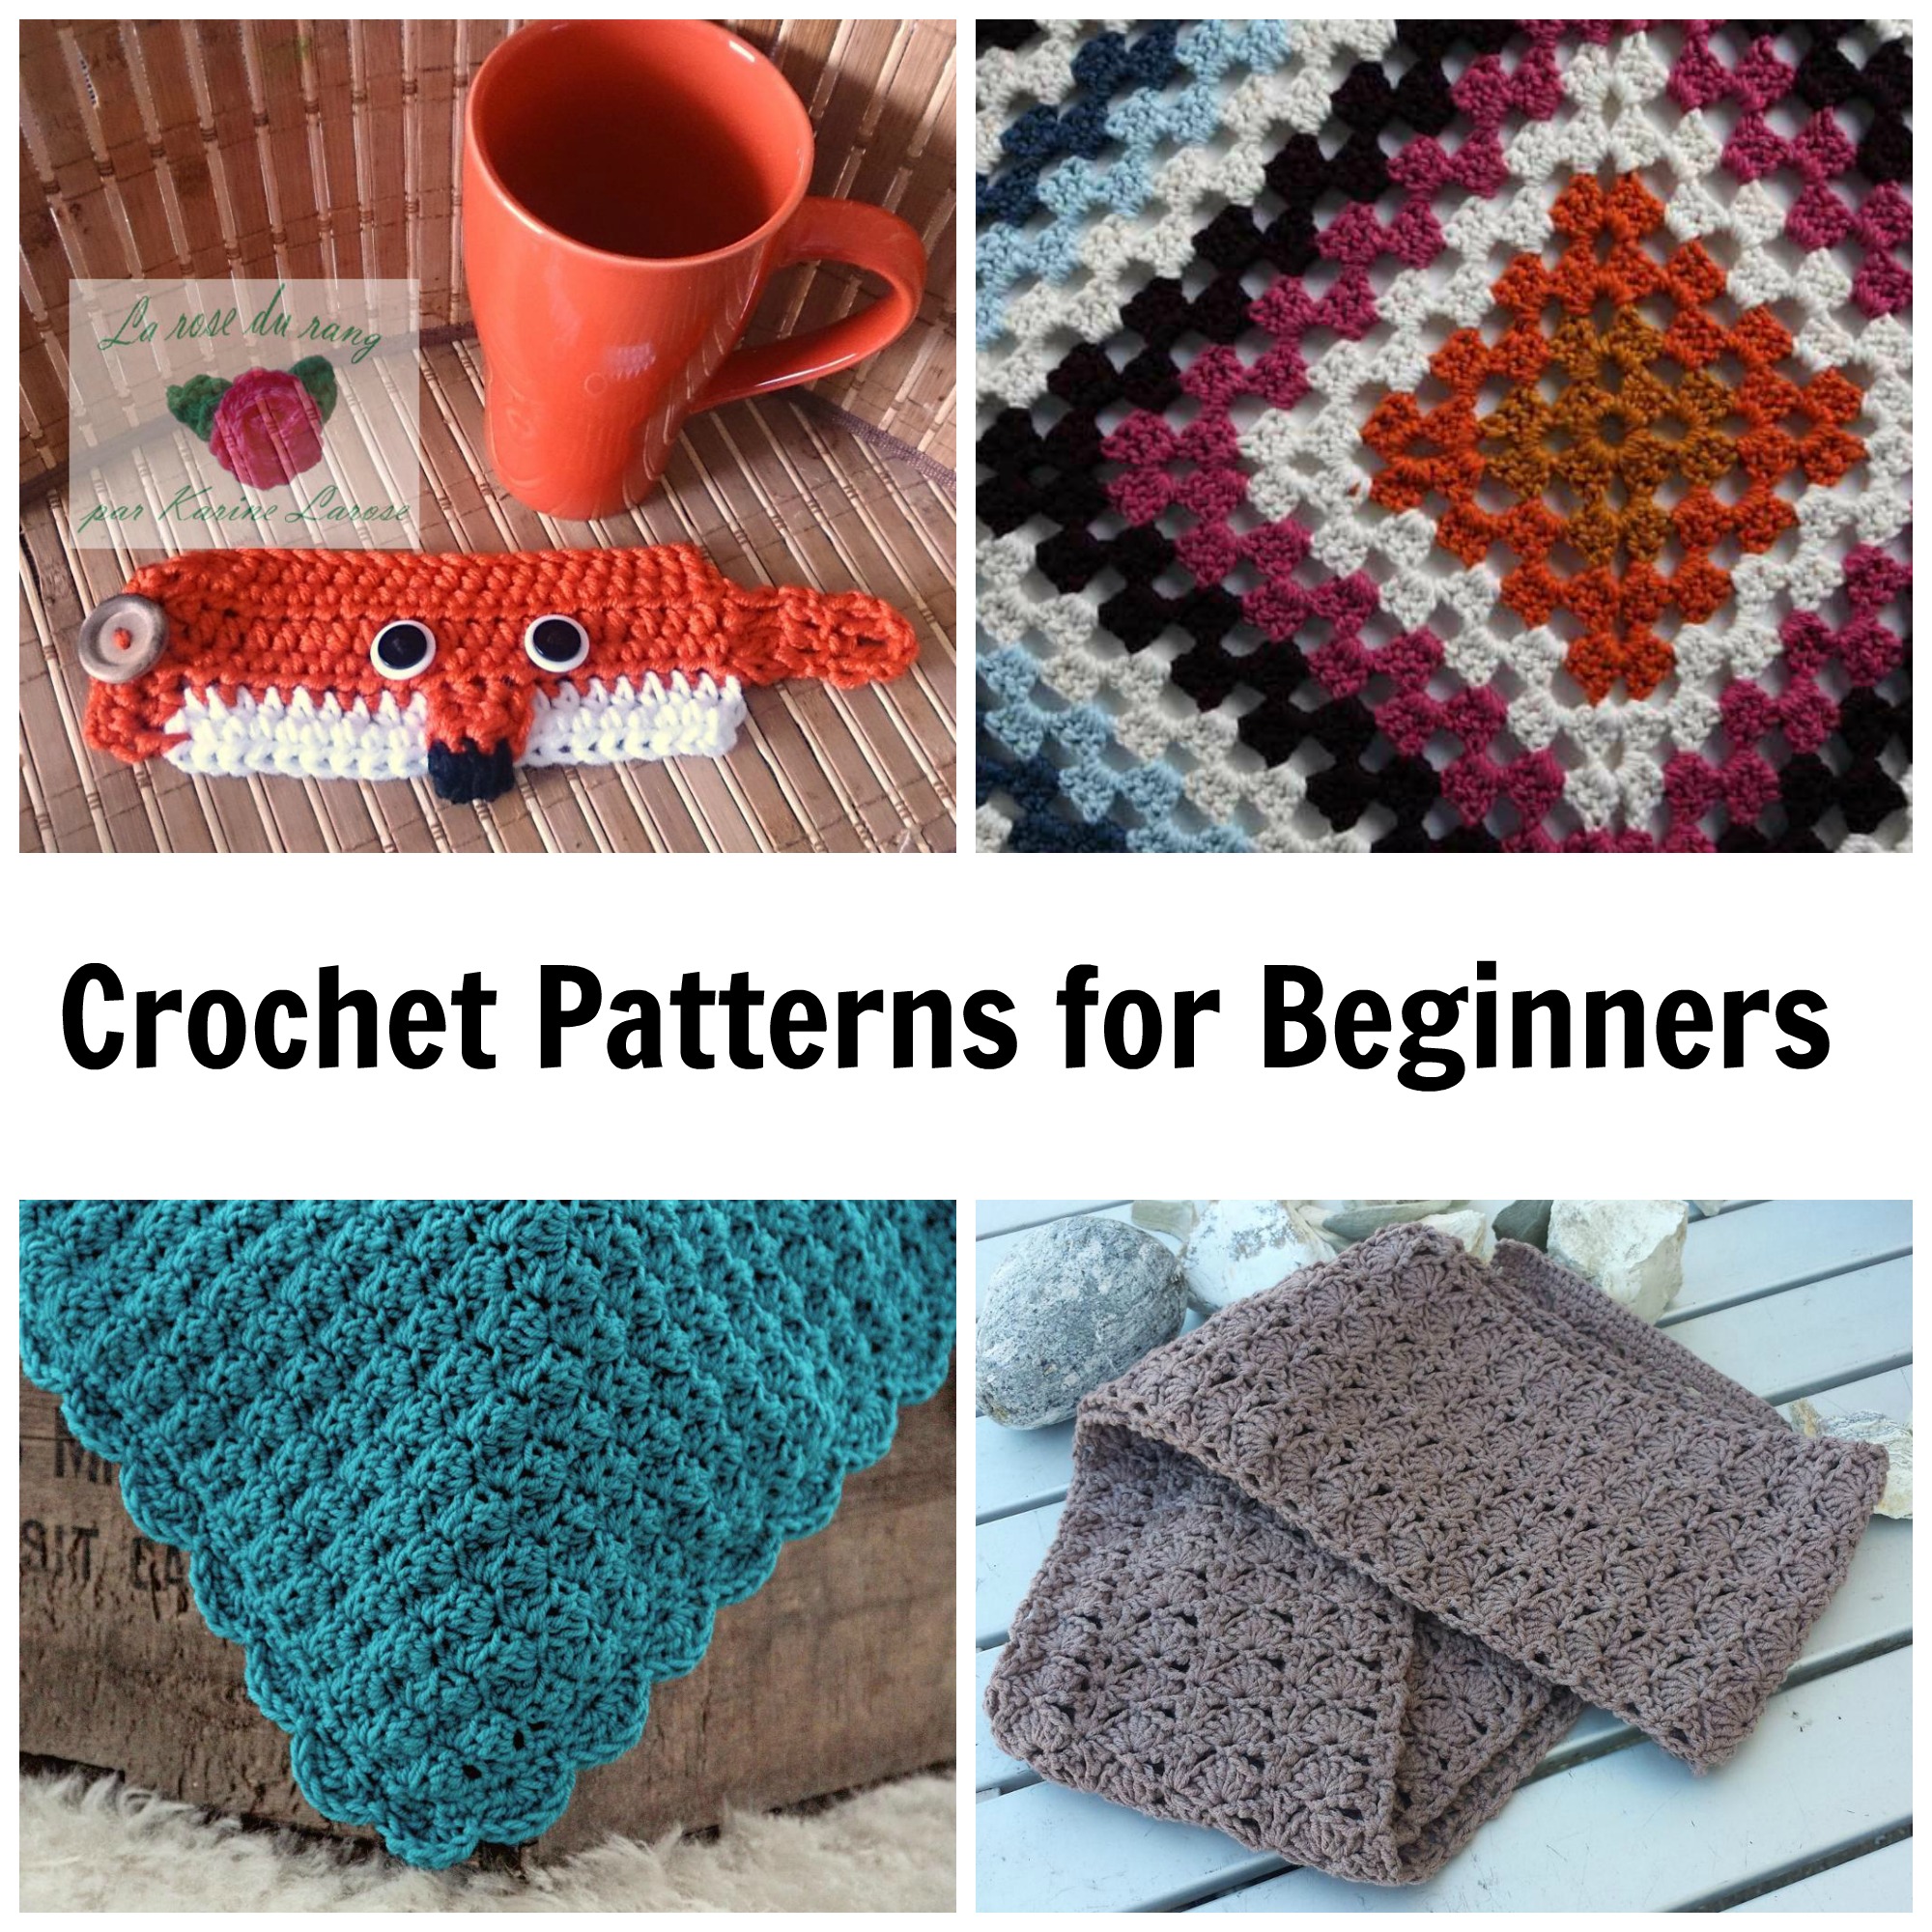 7 Not Boring Crochet Patterns For Beginners,When Are Figs In Season In Ny